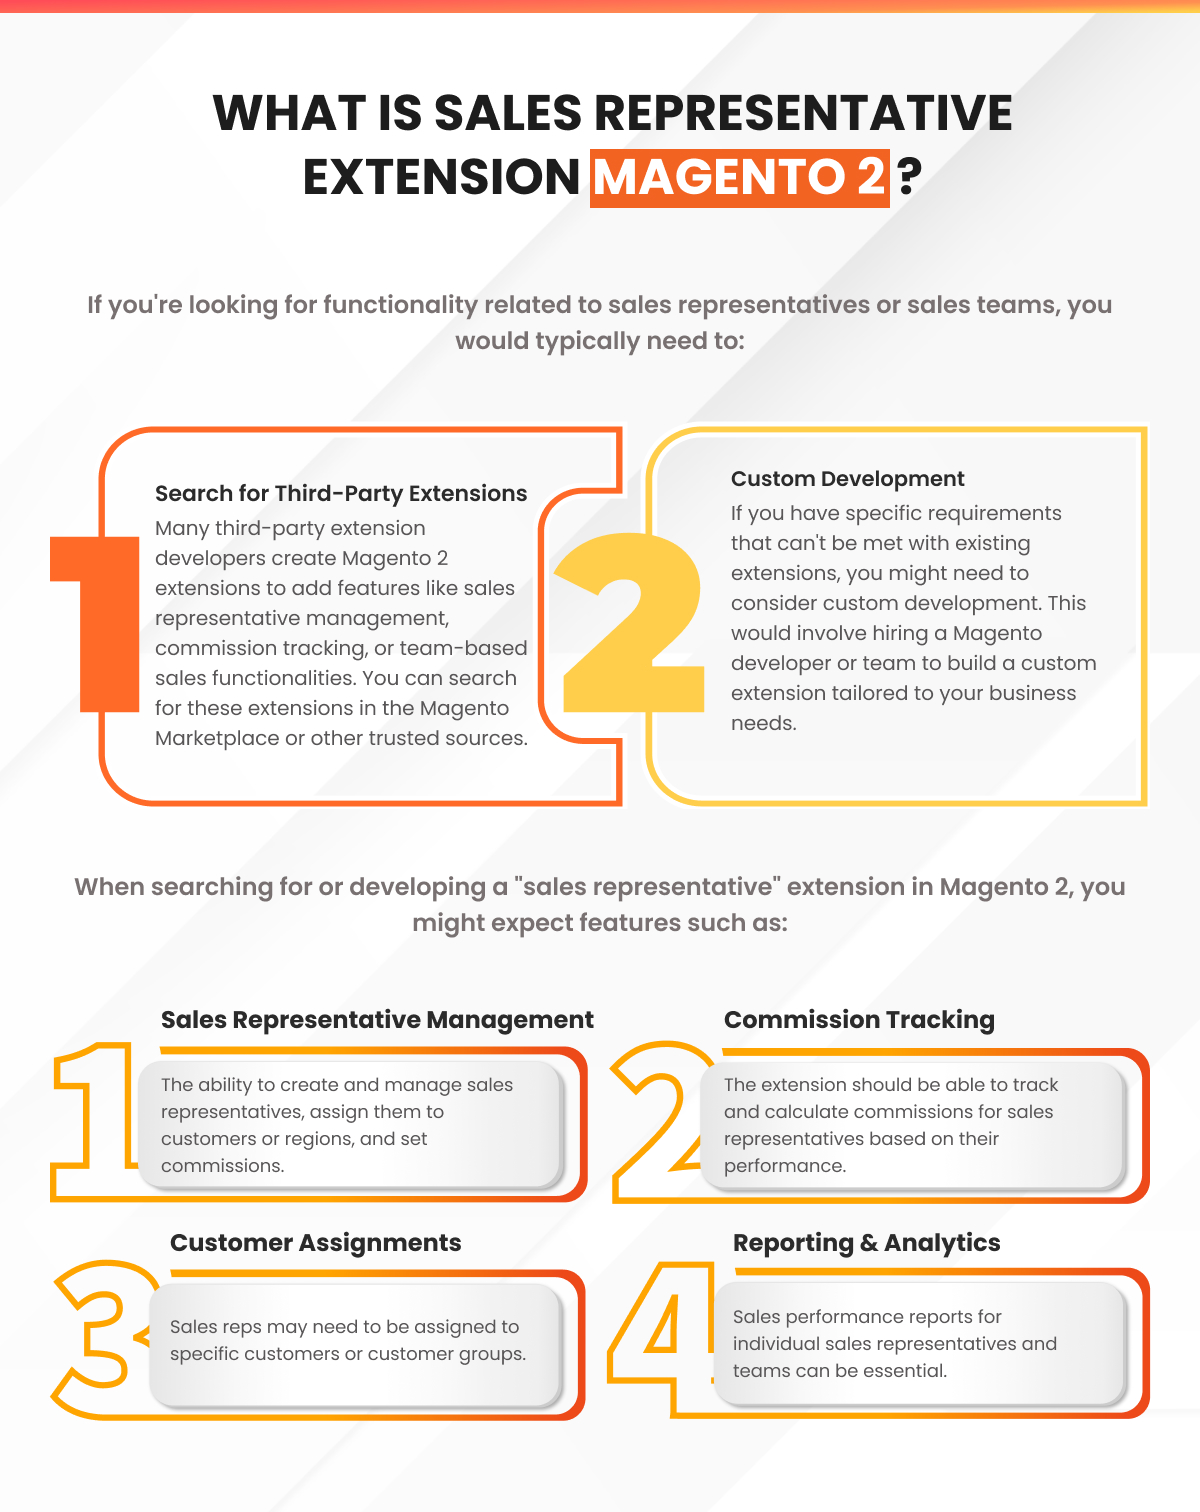 What is sales representative extension Magento 2